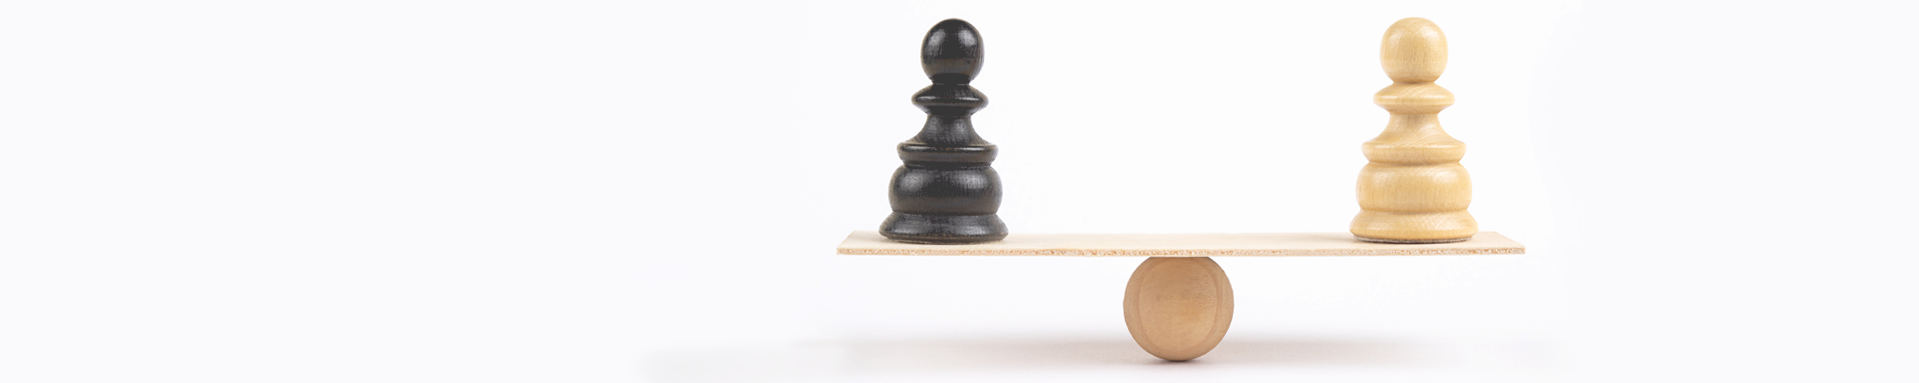 Black and white chess pawns are balanced on a wooden seesaw.